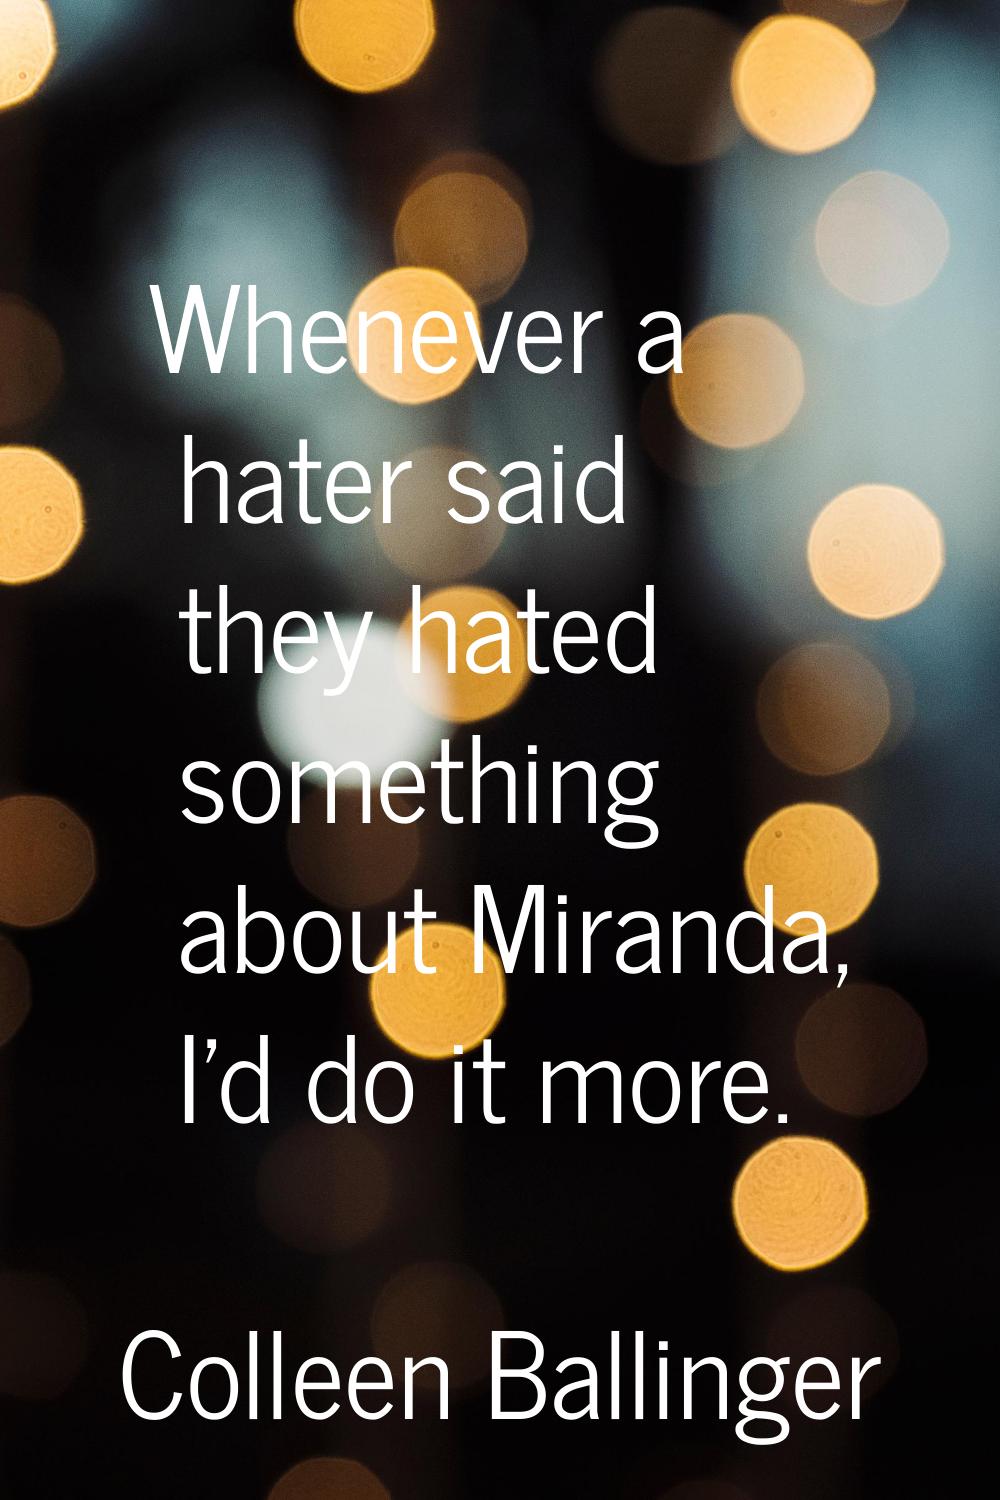 Whenever a hater said they hated something about Miranda, I'd do it more.